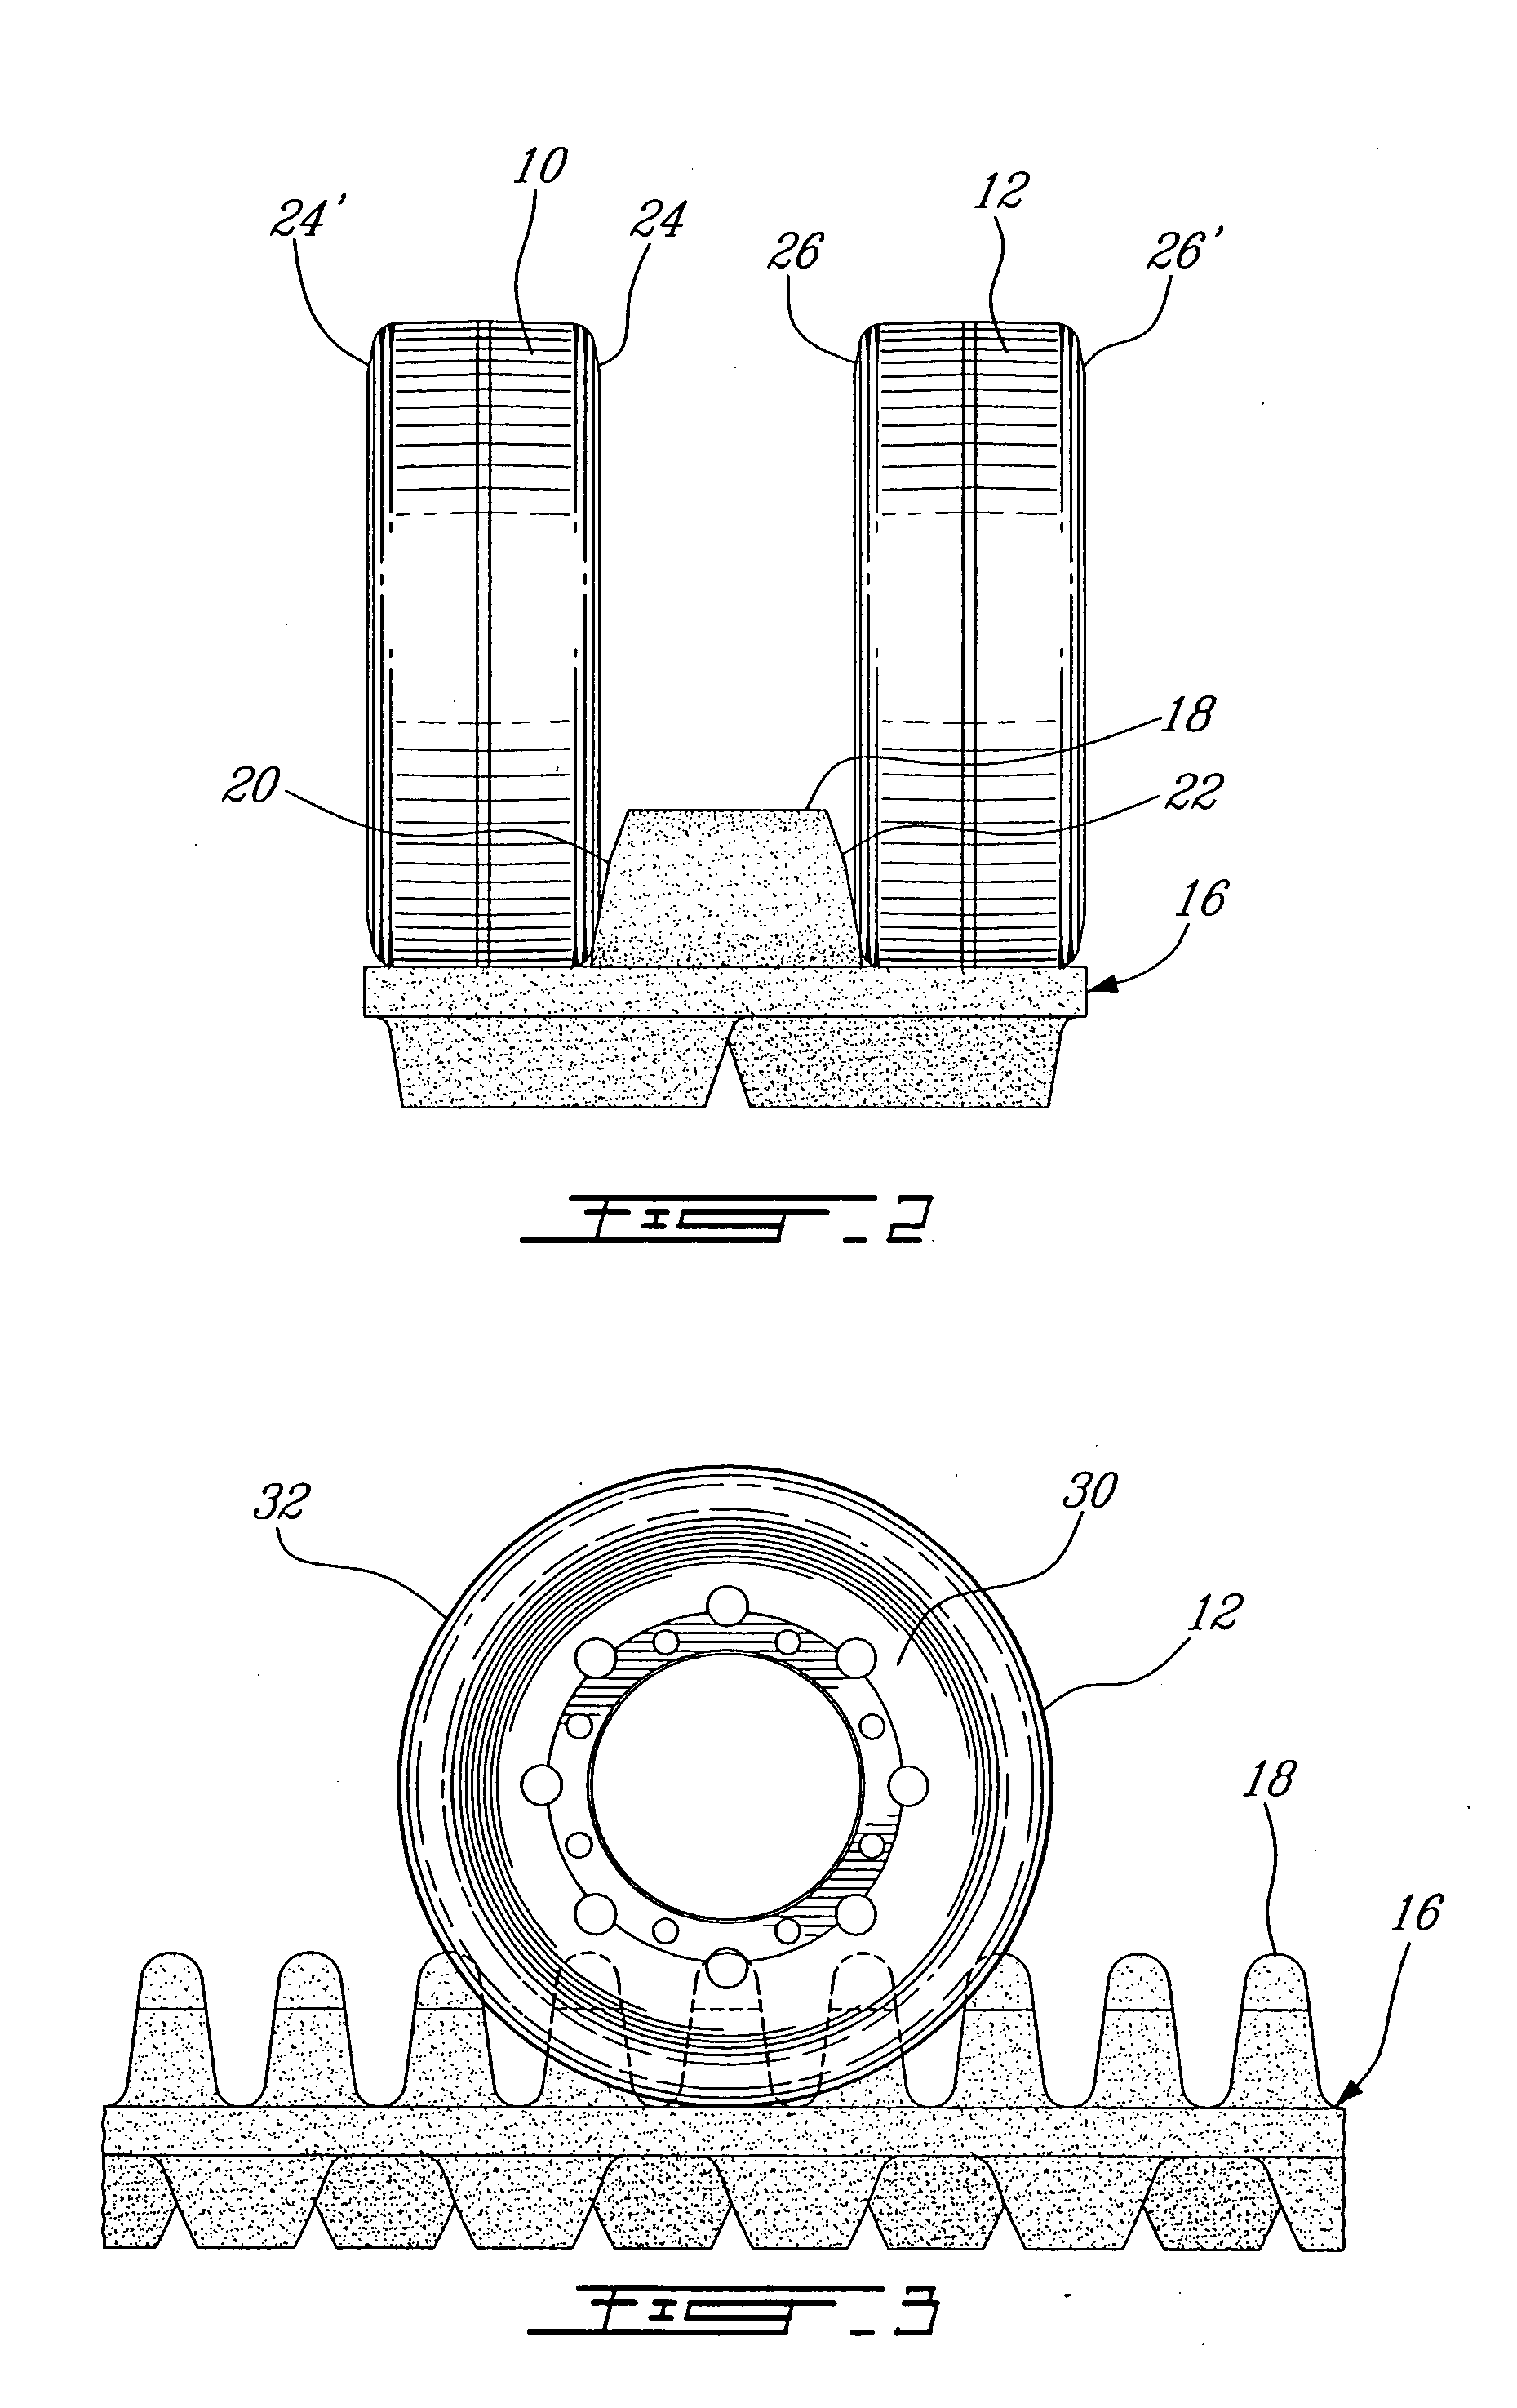 Mid-roller wheels for endless drive track system